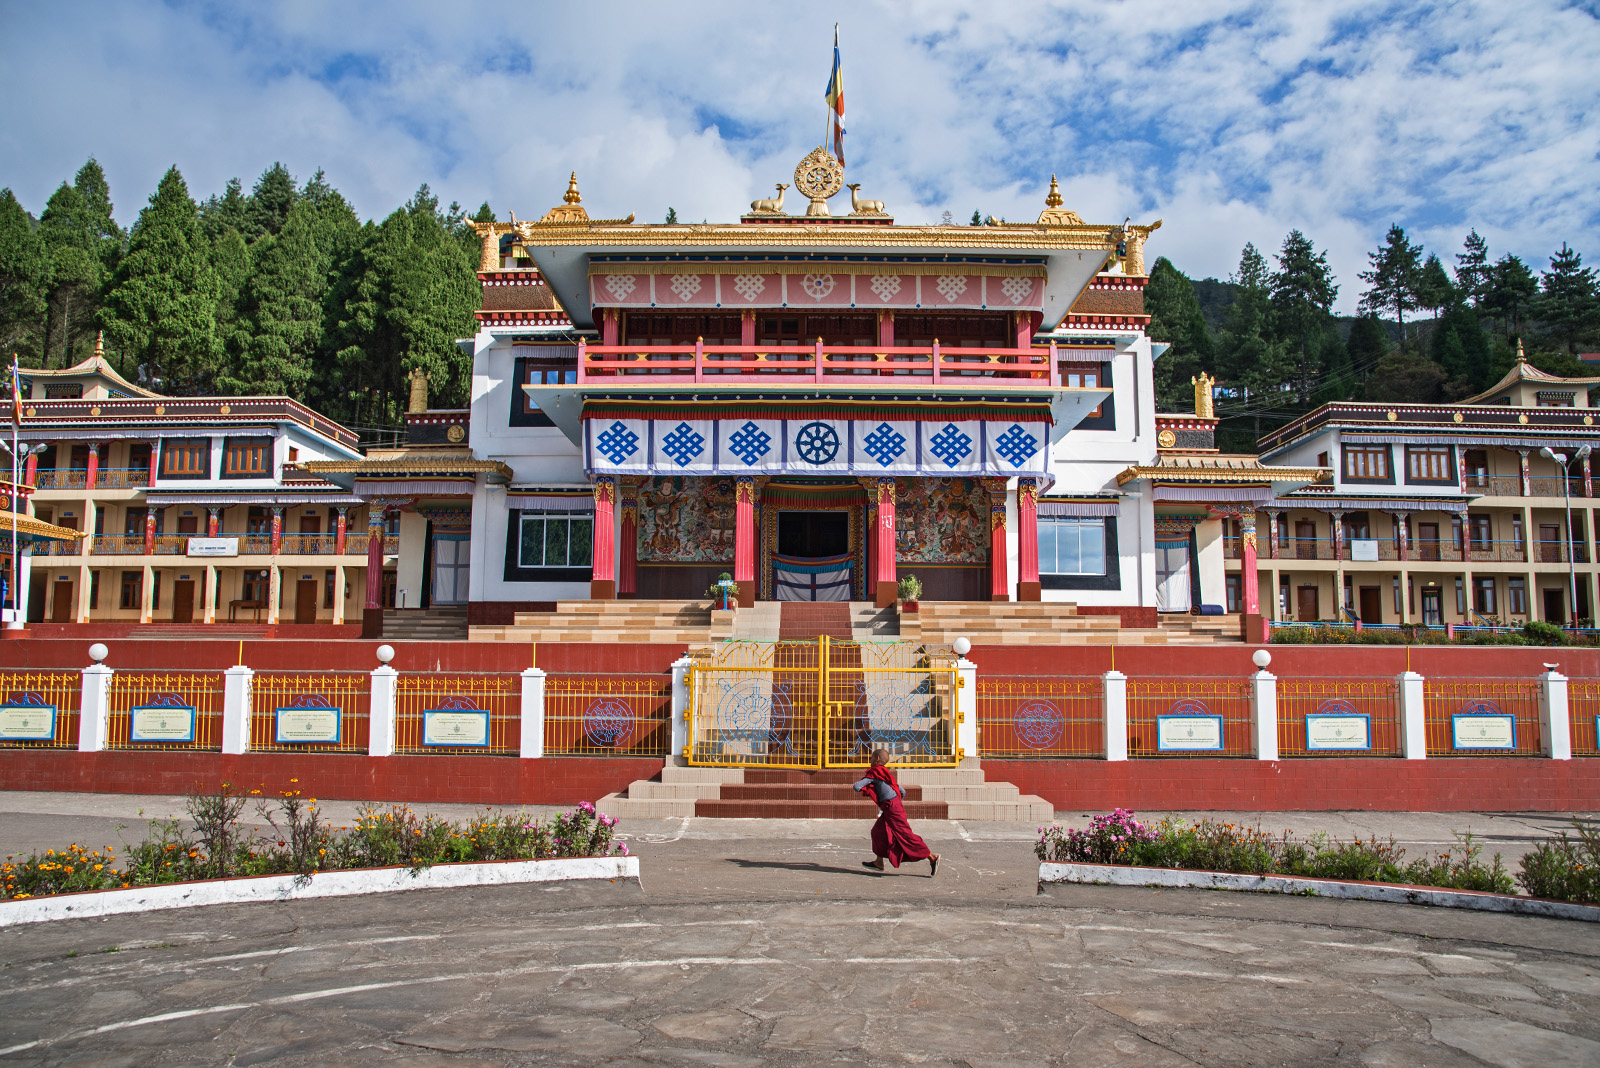 Bomdila is famous for its Buddhist monasteries, with the most prominent being the Bomdila Monastery